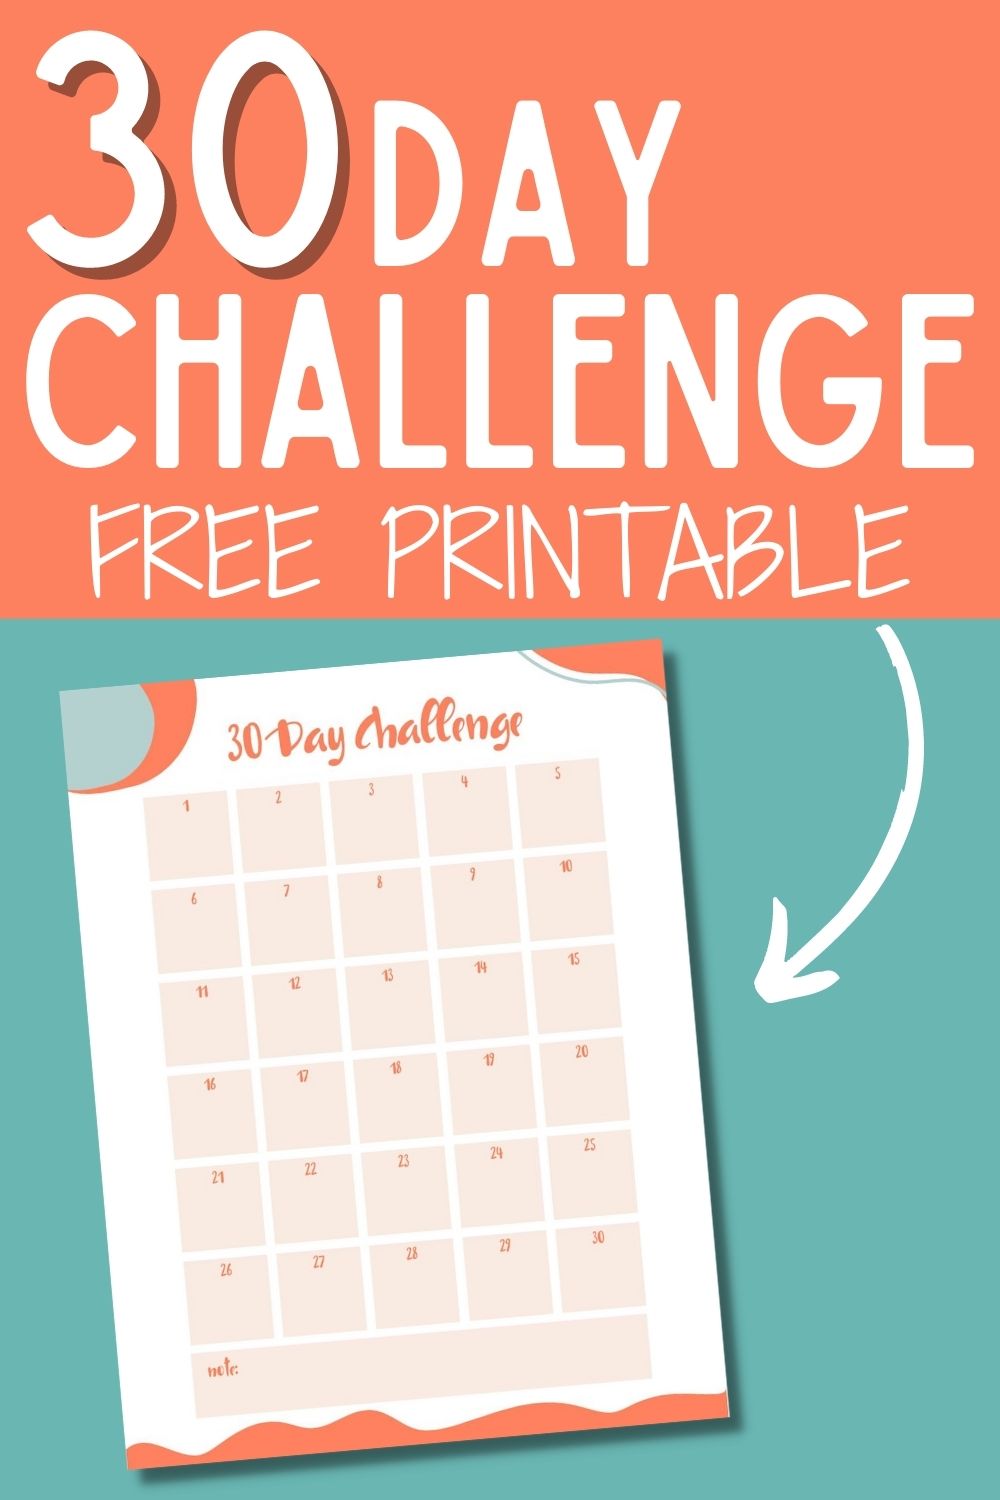 free-printable-30-day-challenge-calendar-pdf-a4-and-letter